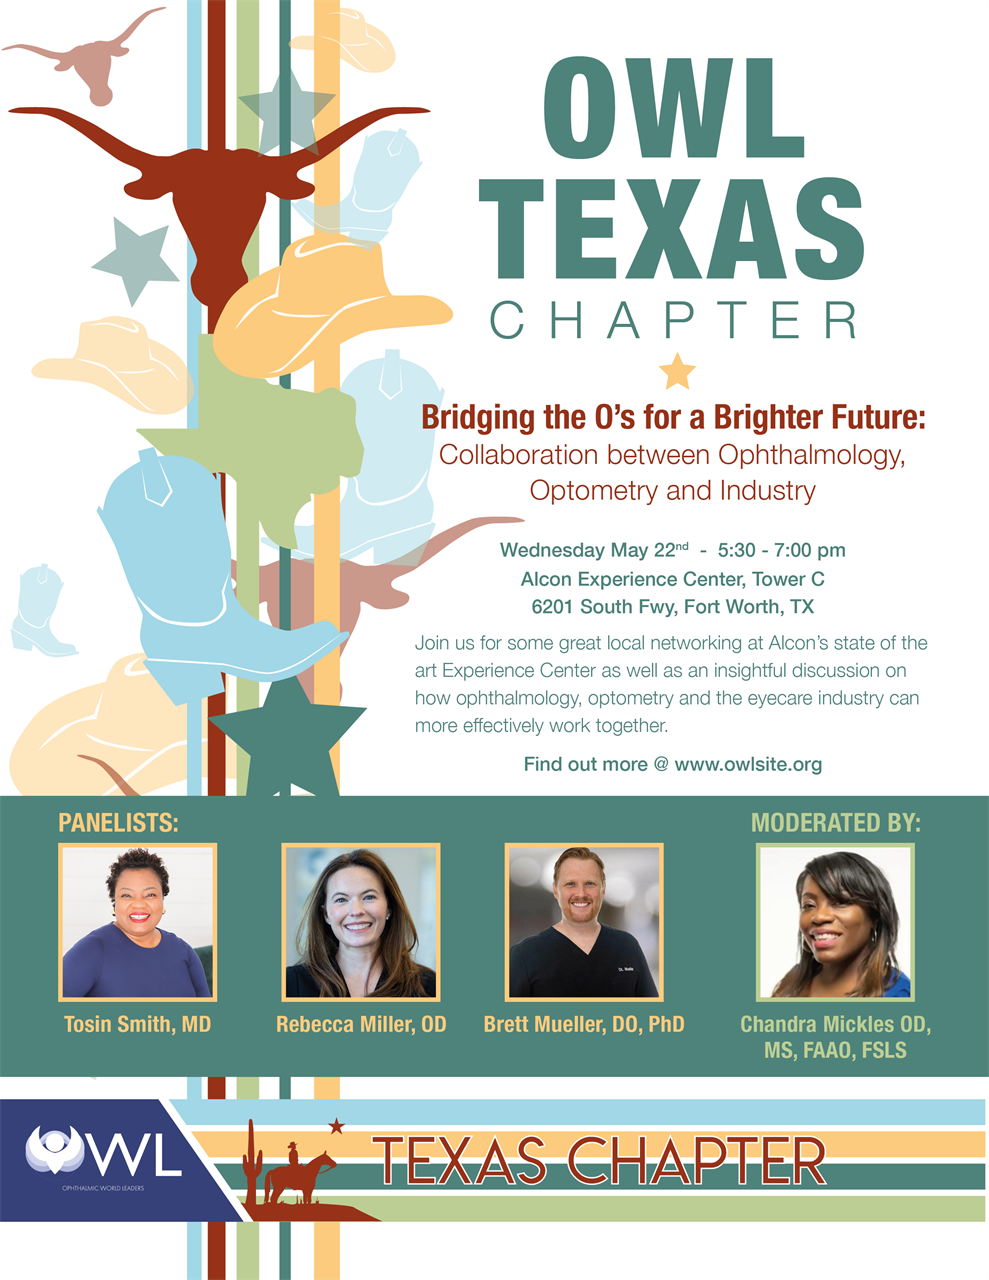 OWL Texas Chapter Program | "Bridging the O's for a Brighter Future: Collaboration between Ophthalmology, Optometry and Industry"; Wednesday, May 22nd; 5:30-7 PM; Location: Alcon Experience Center, Tower C, 6201 South Fwy, Fort Worth, TX | Join us for some great local networking at Alcon's state of the art Experience Center as well as an insightful discussion on how ophthalmology, optometry and the eyecare industry can more effectively work together. Register now to attend!